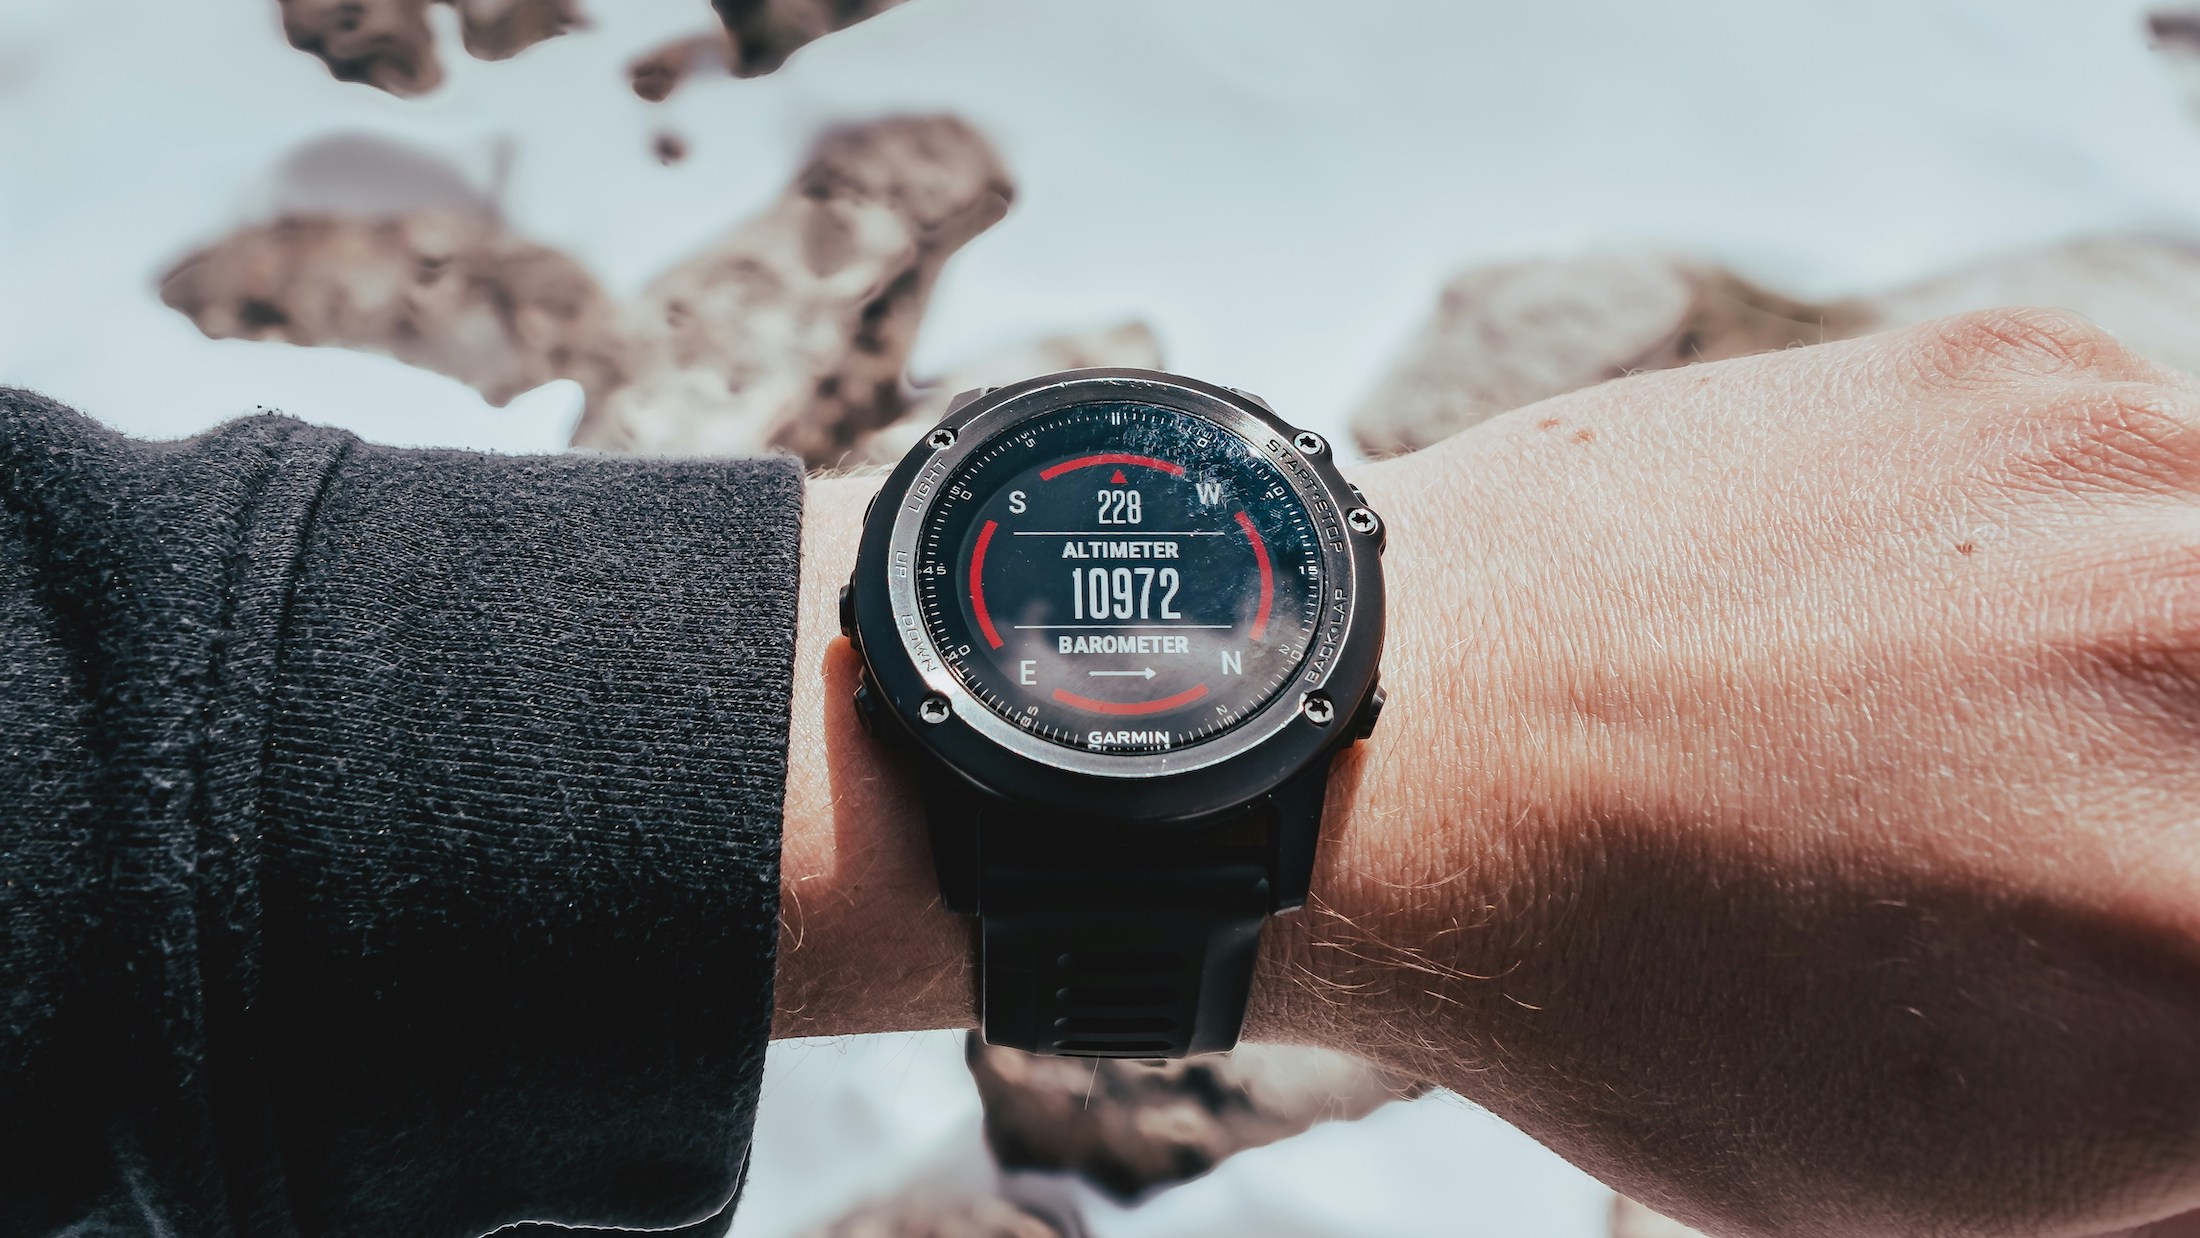 Best Military Watches